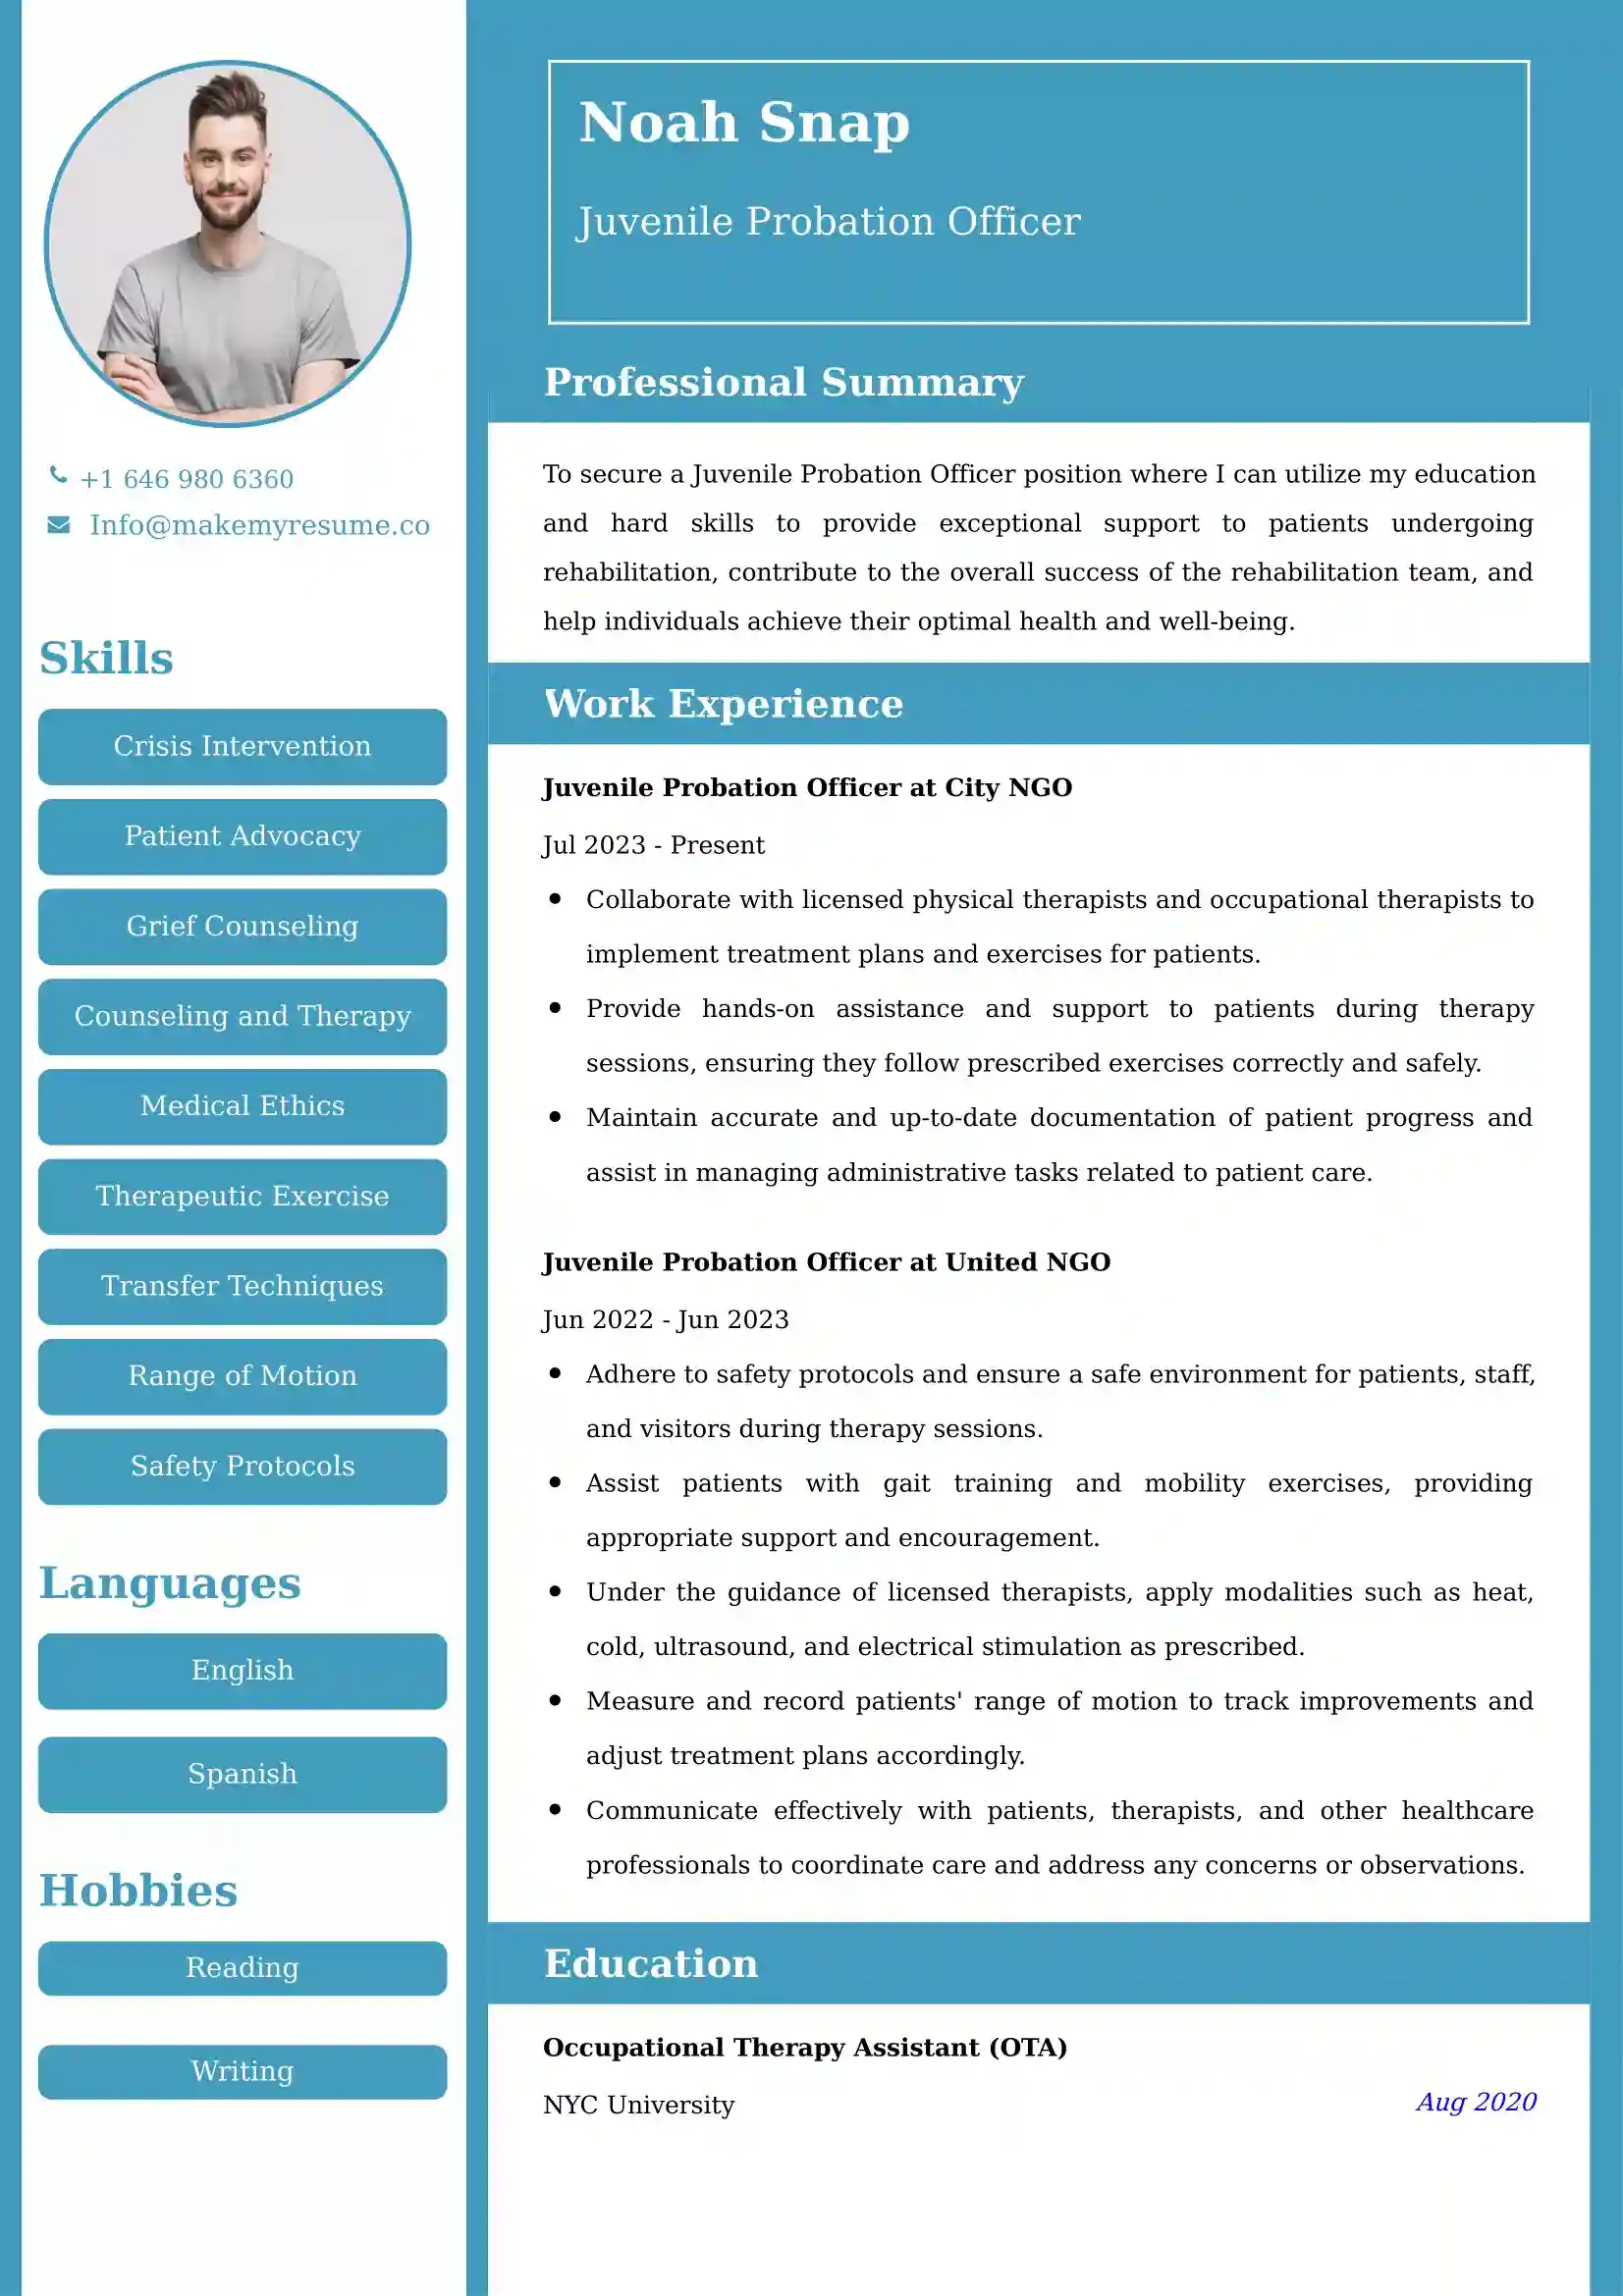 Juvenile Probation Officer Resume Examples - Brazilian Format, Latest Template